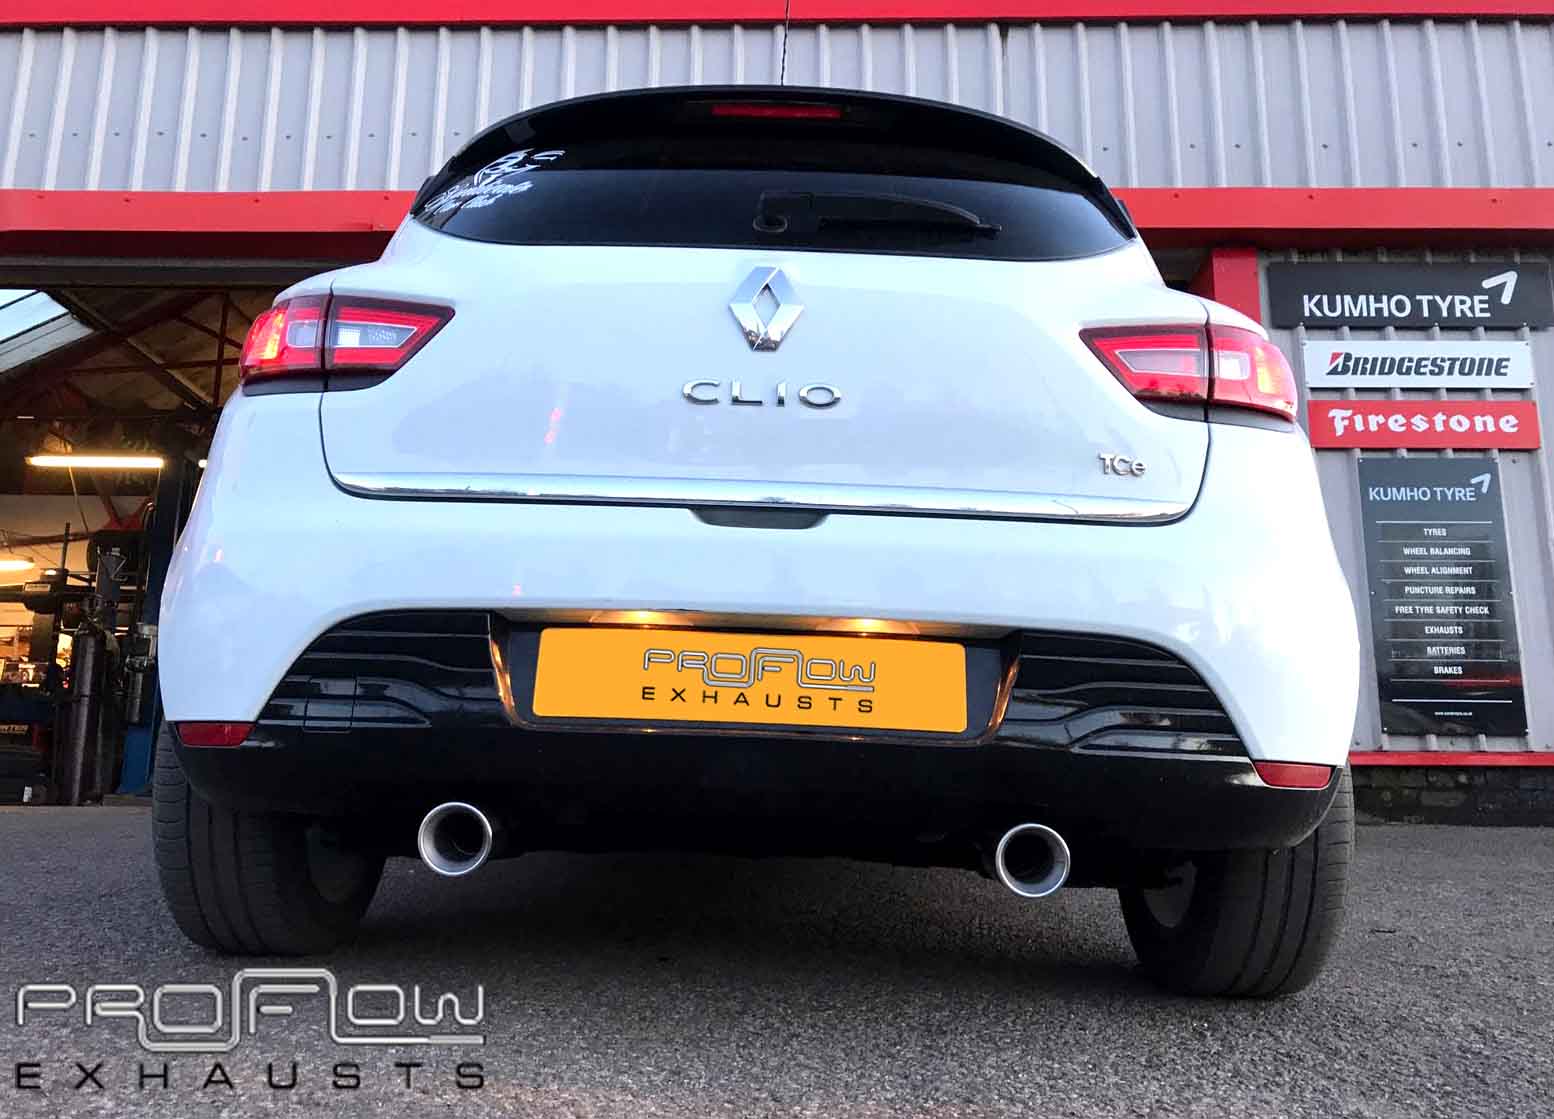 Renault Clio Fitted With Daul Rear Sinlge Tip Stainless Steel Exhaust Proflow Exhausts (4)